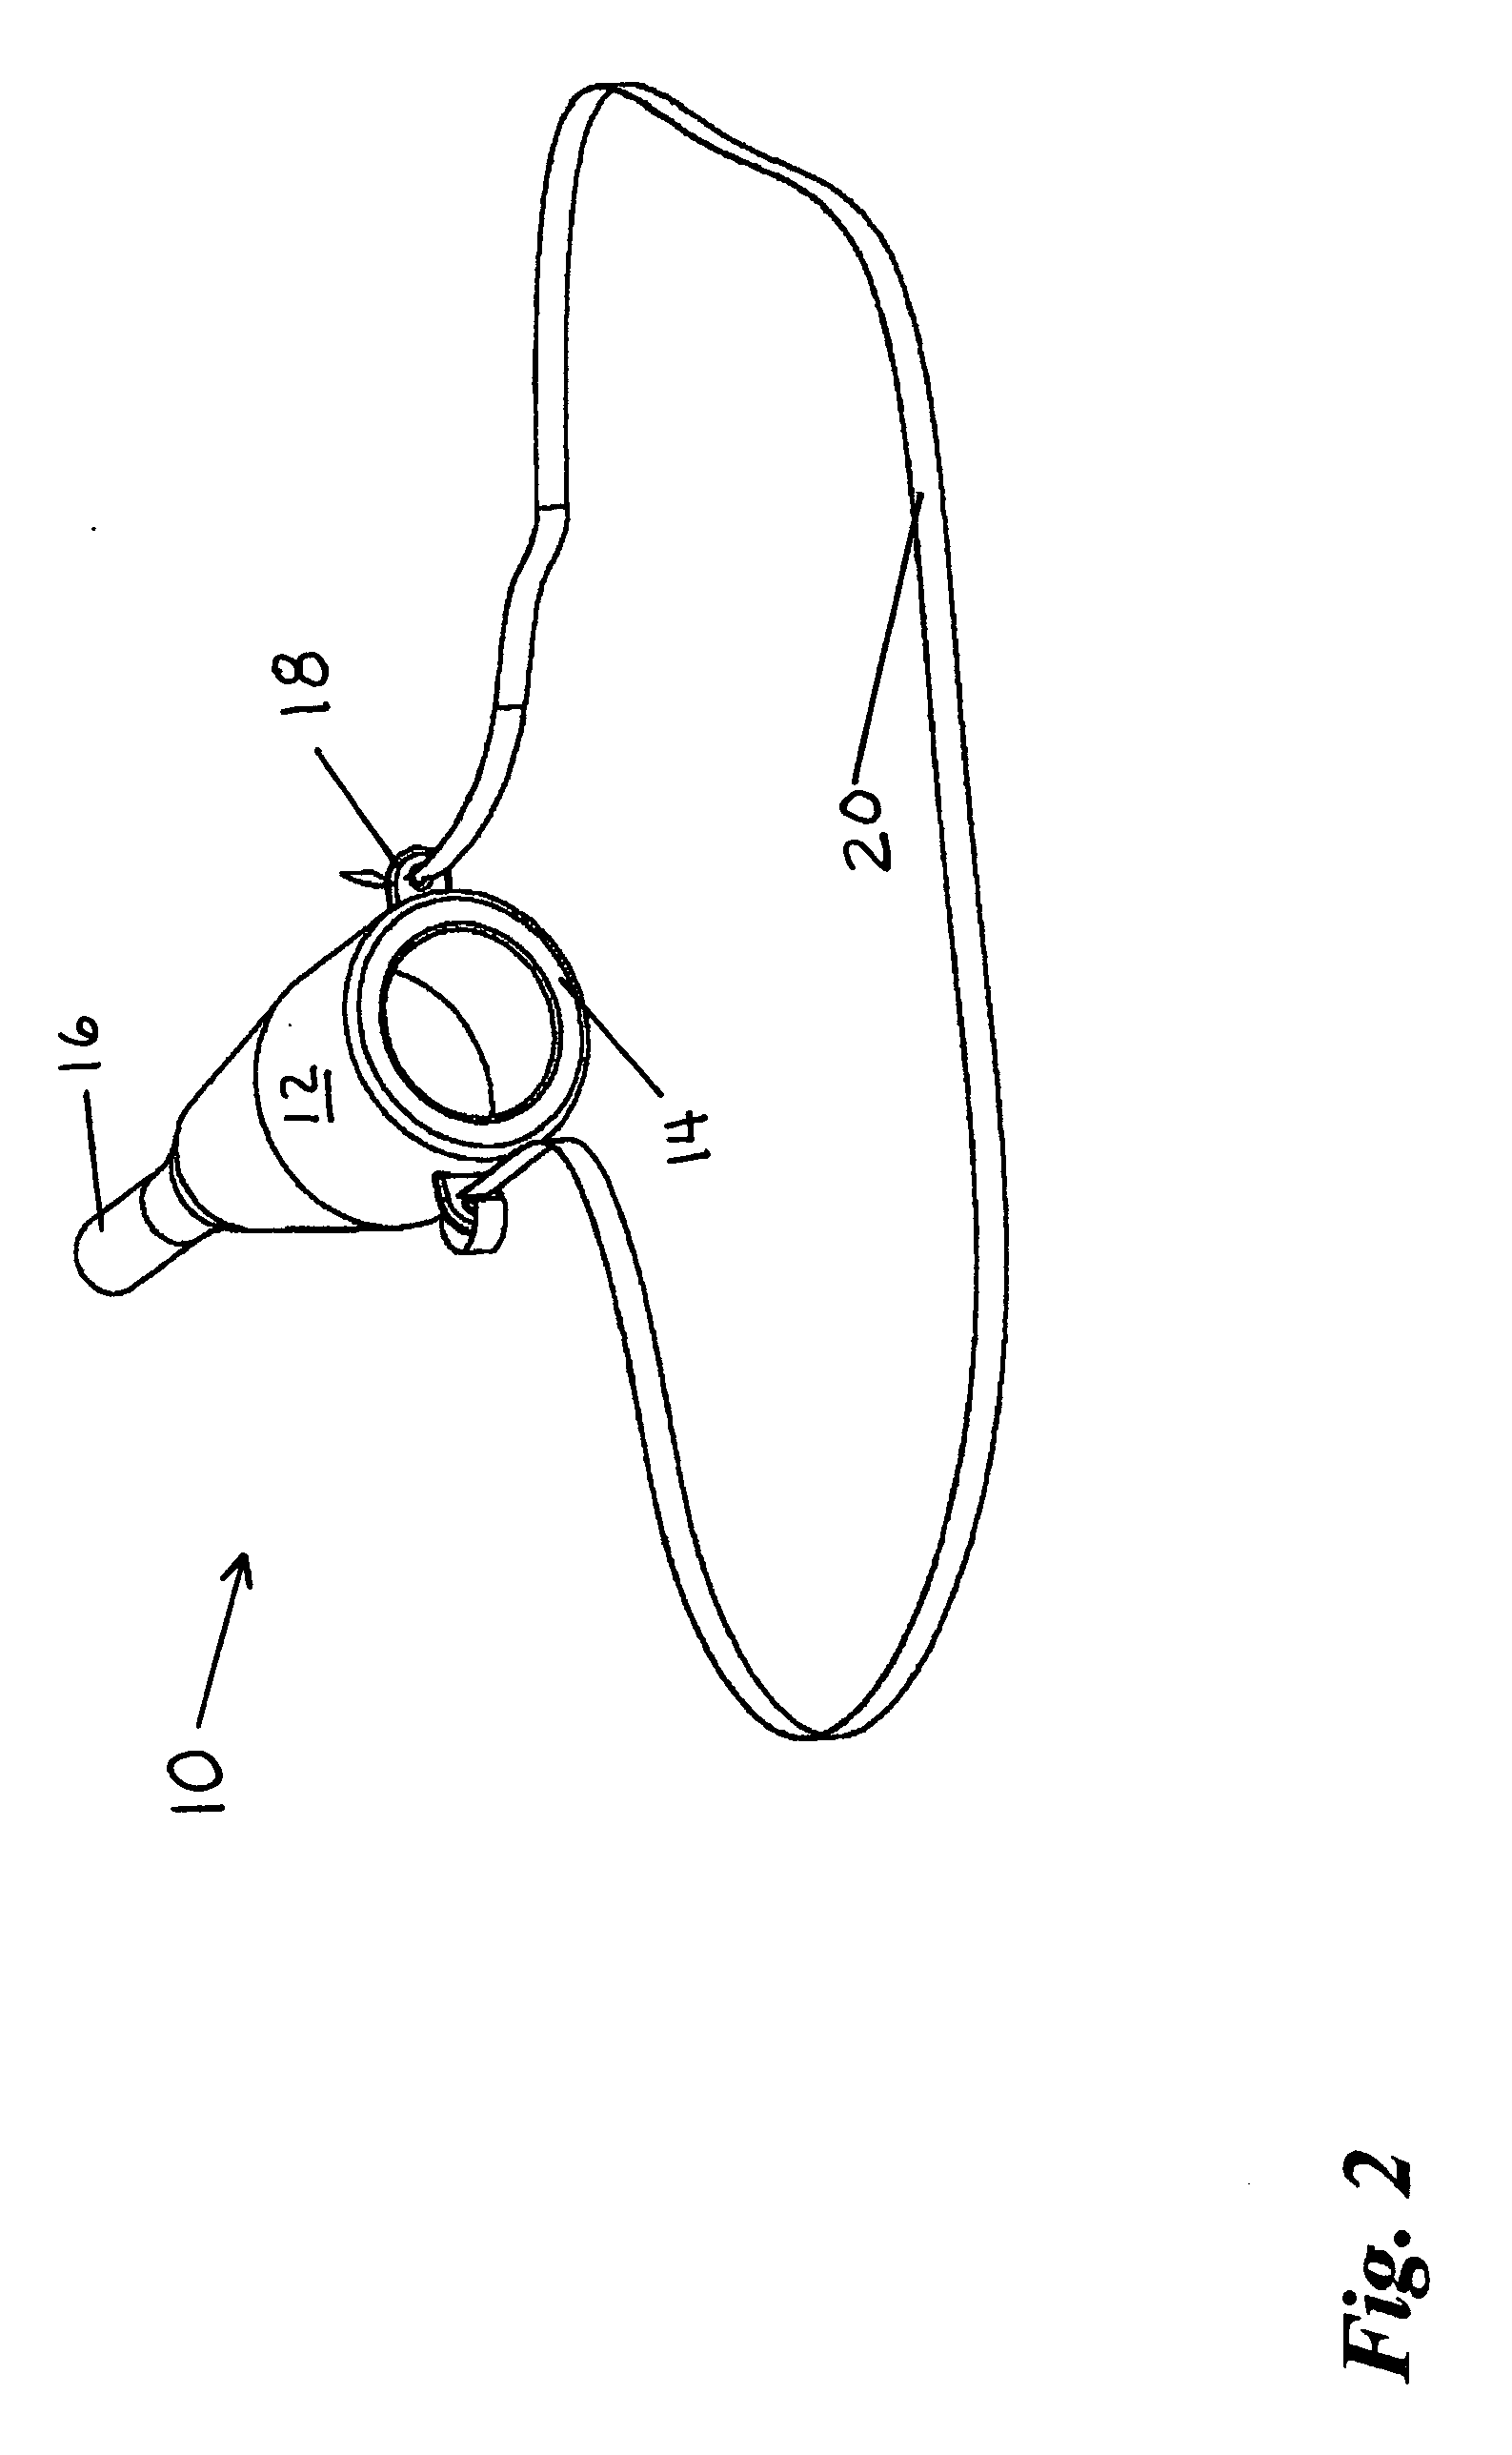 Male urinary incontinence apparatus